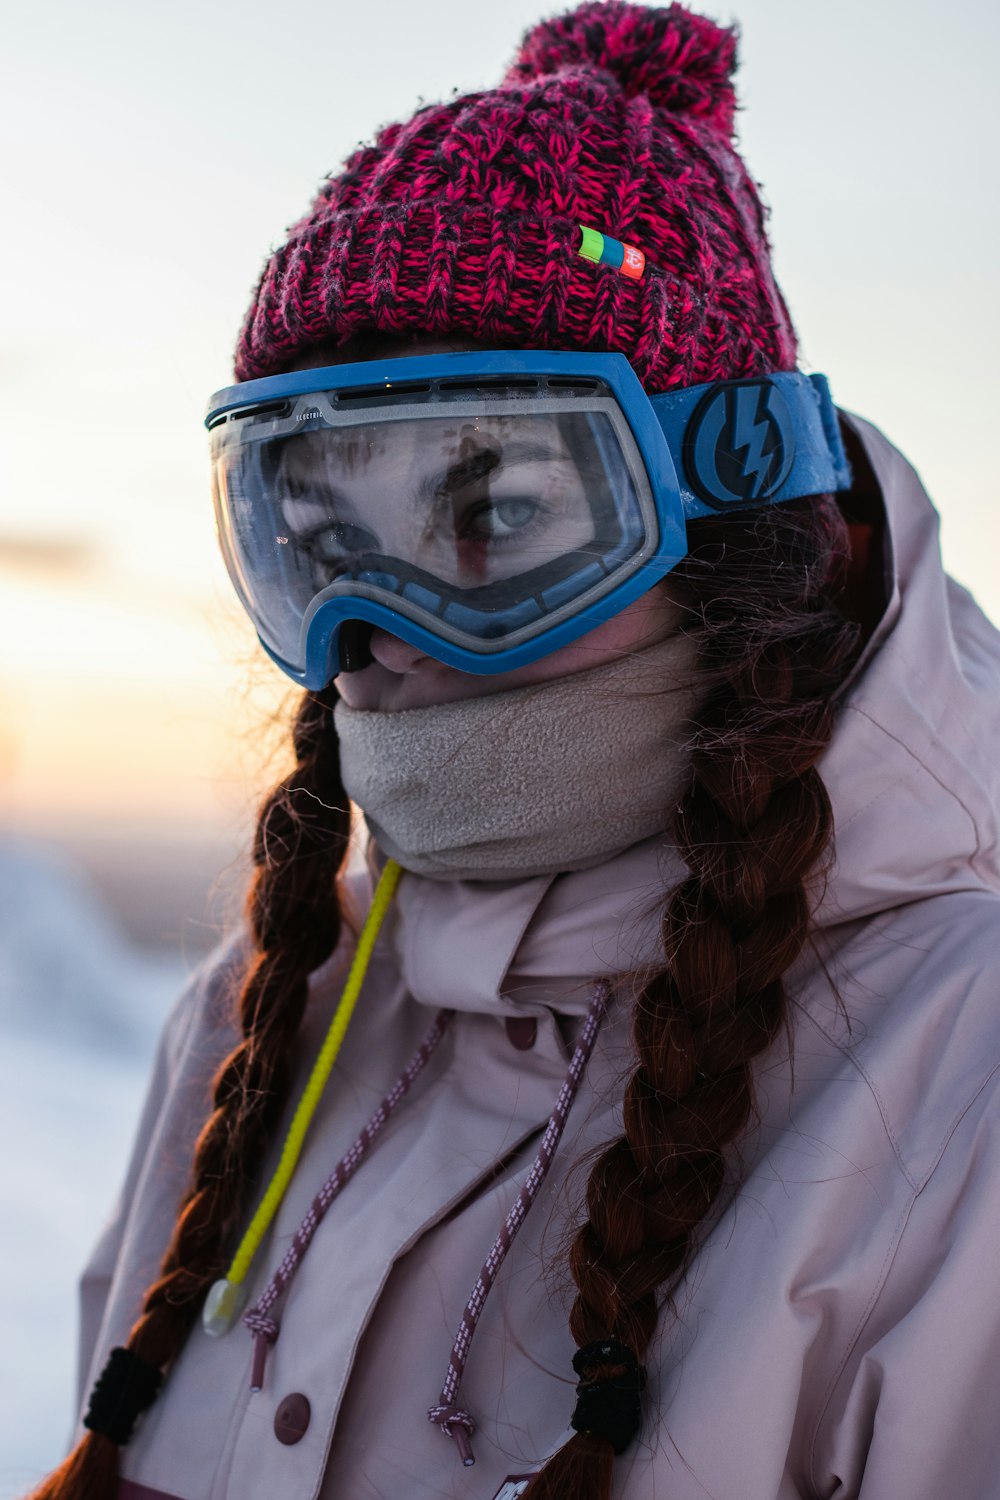 woman in white jacket wearing blue goggles and red knit cap